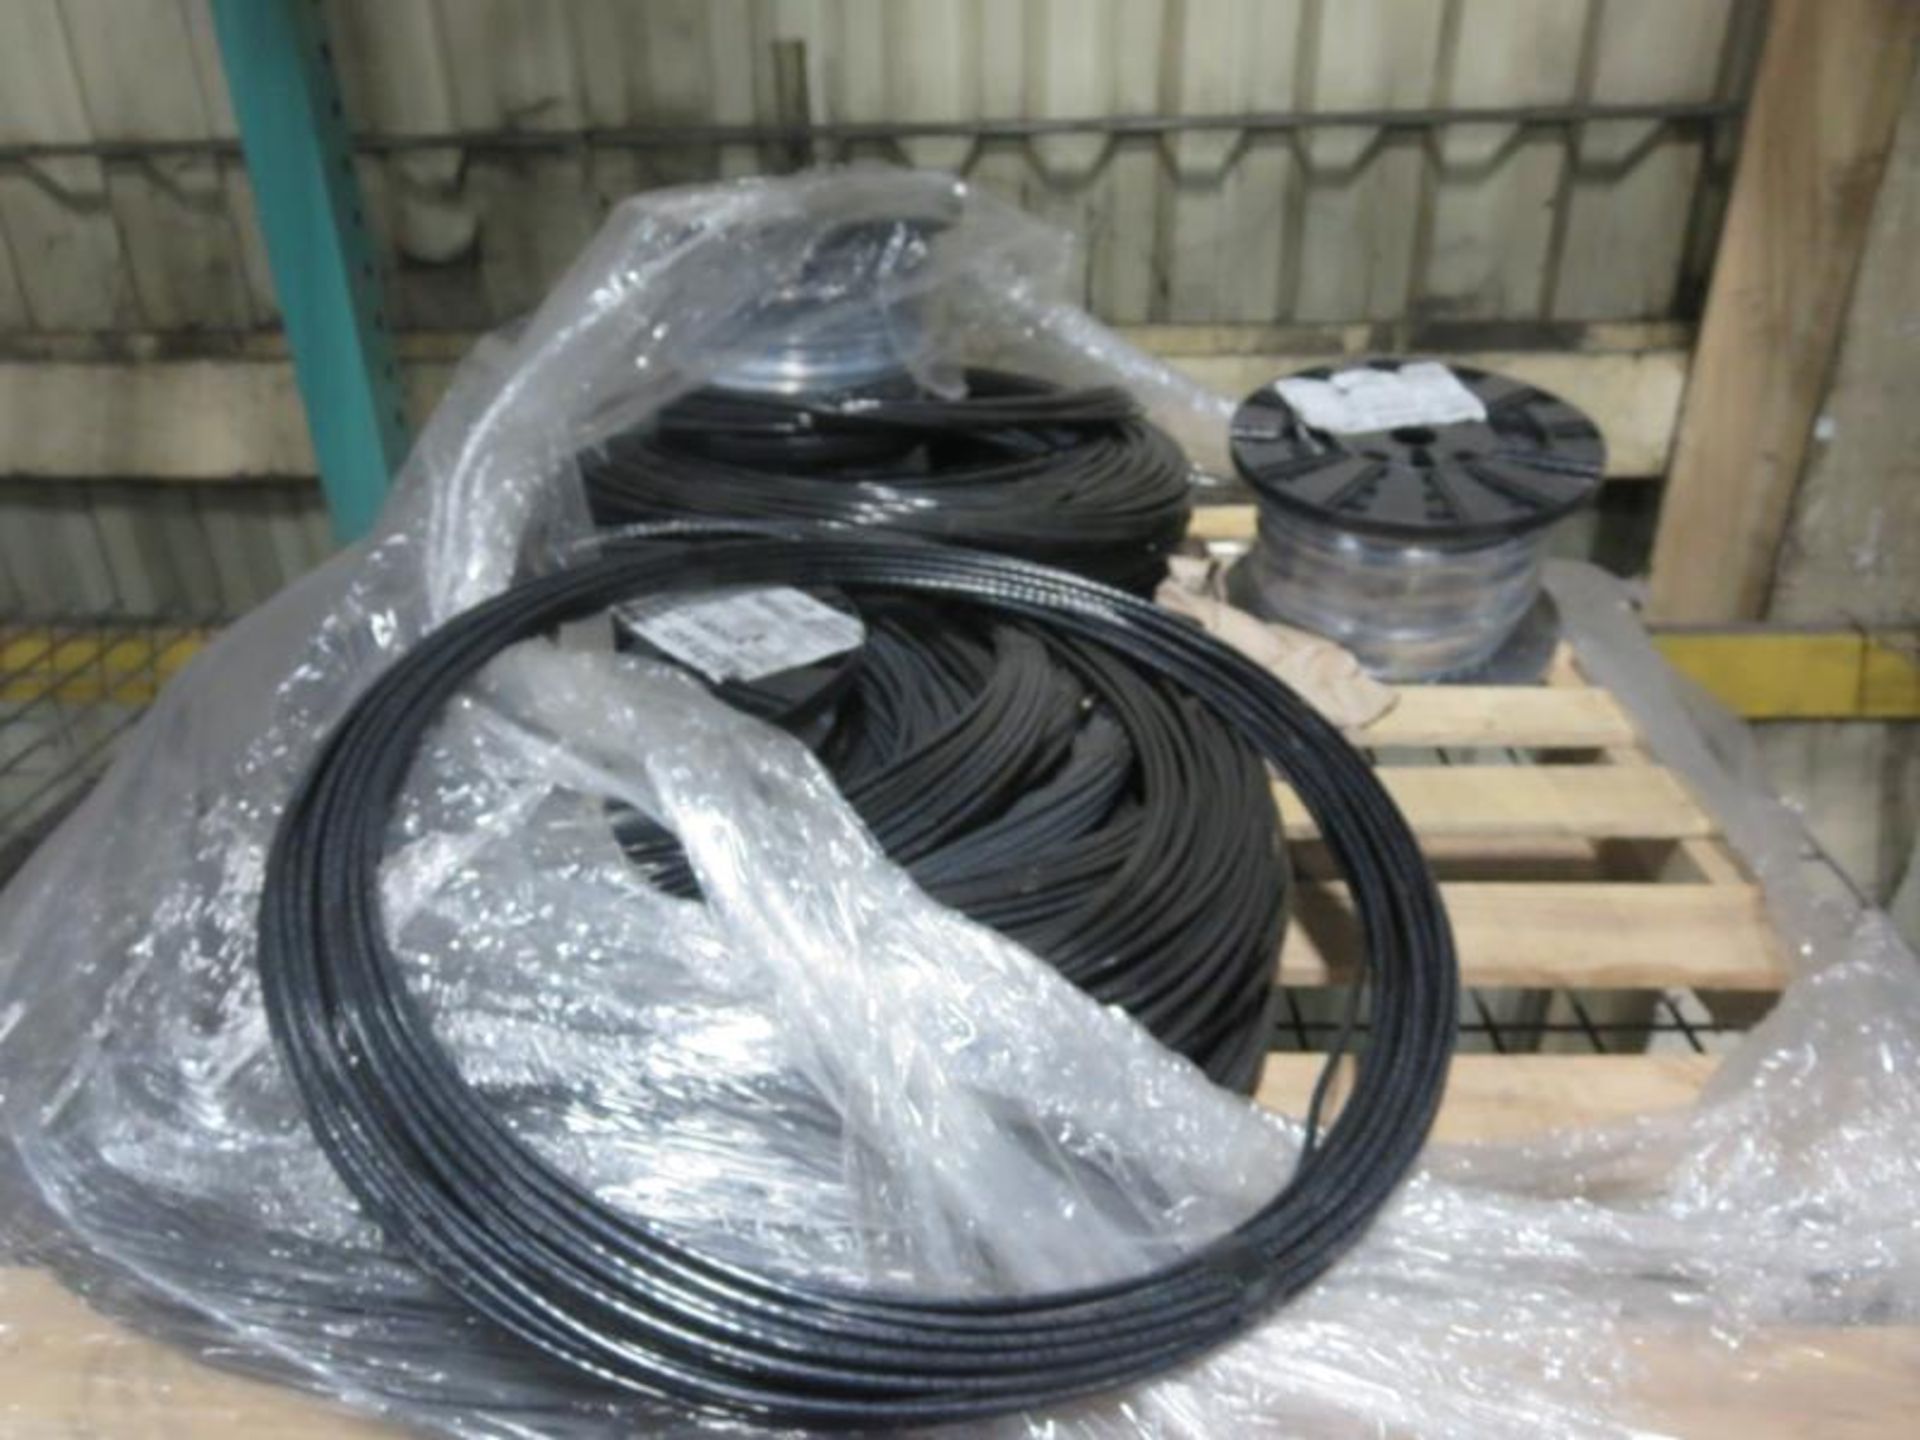 Fiber Optic Cable. Lot (2) Roll fiber optic & (1) Skid 8 awg wire. Hit # 2202960. Bldg.1.11.2.9.3. - Image 3 of 3